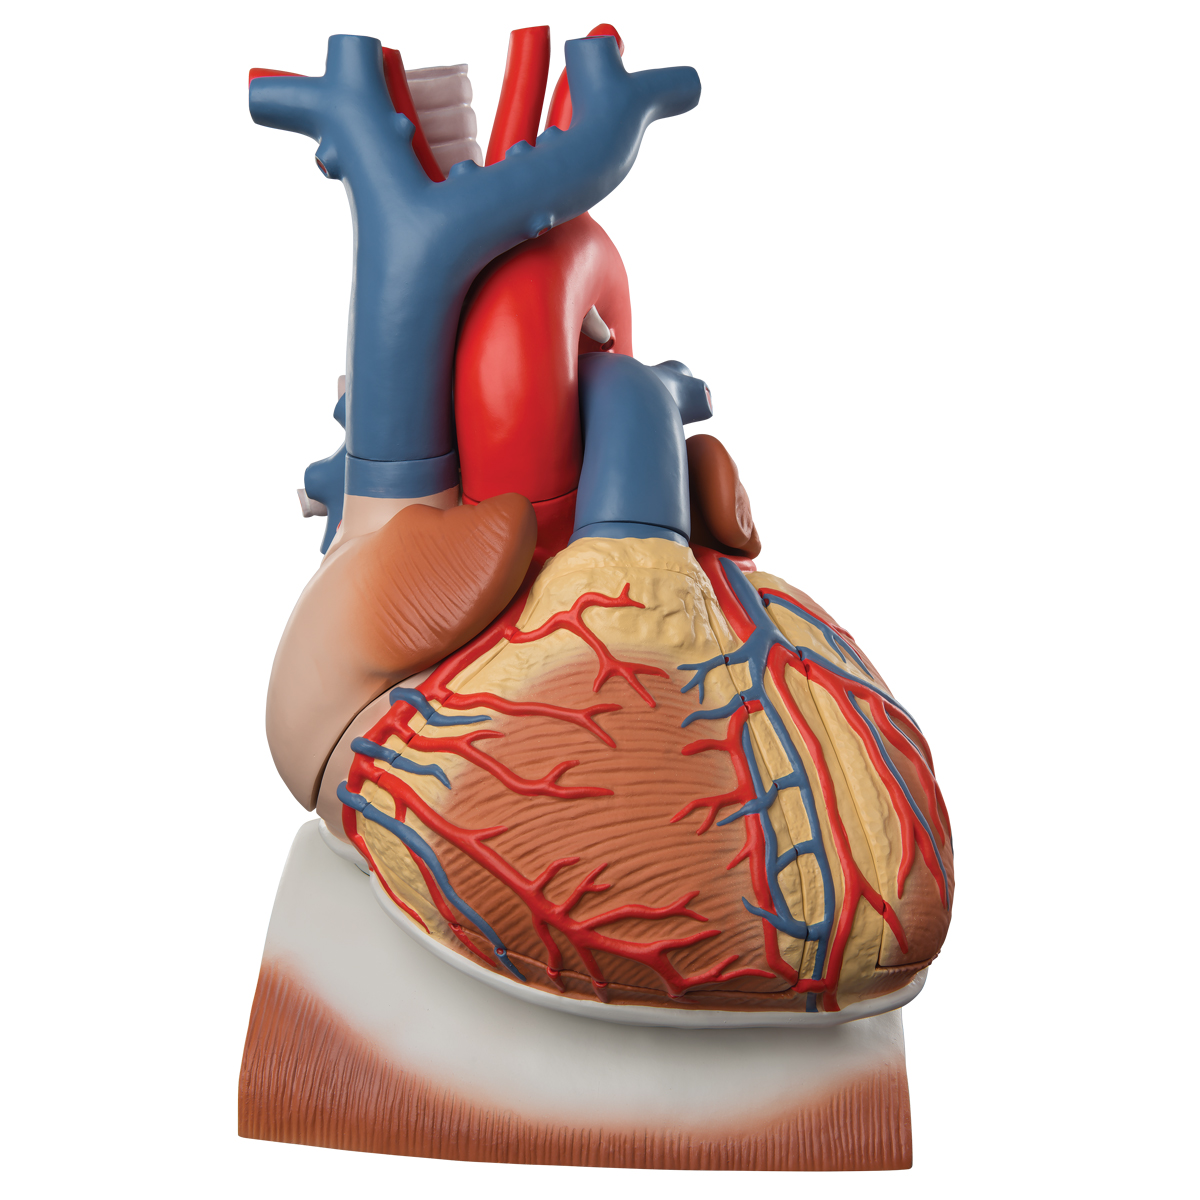 Diagram illustrating the action of the heart and diaphragms.